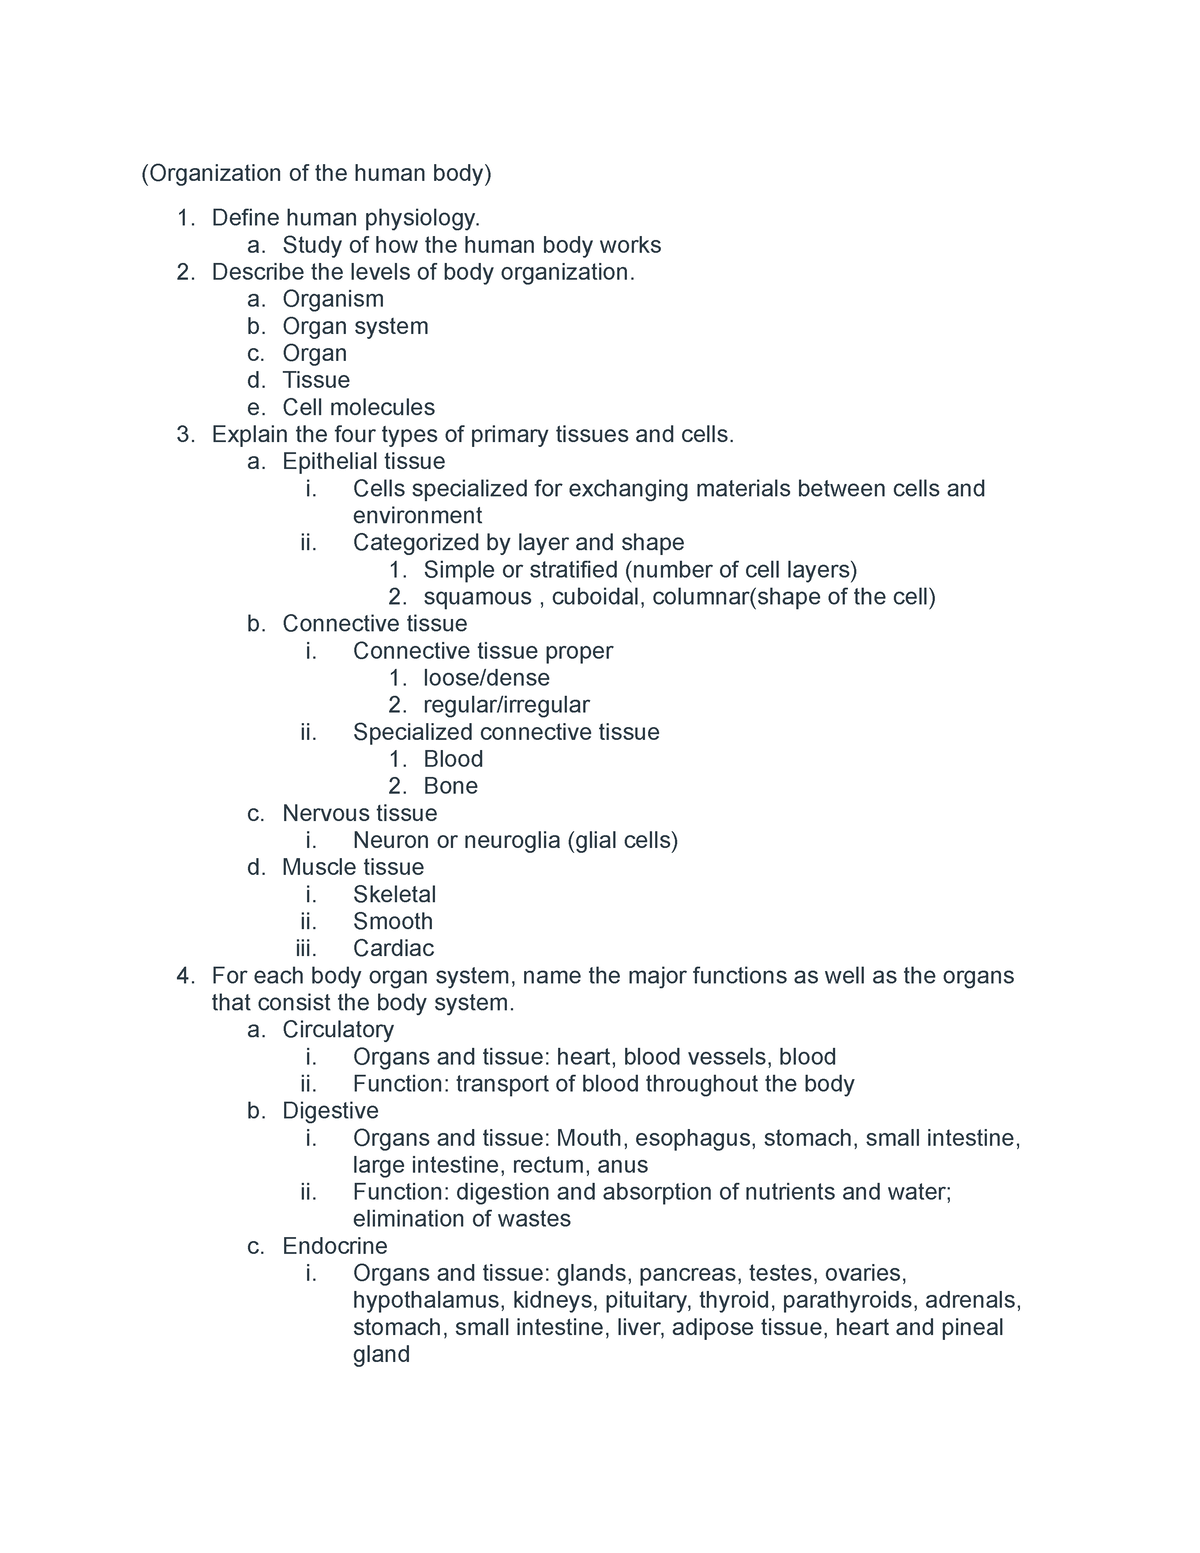 BISC 276 exam 1 learning objectives - (Organization of the human body ...